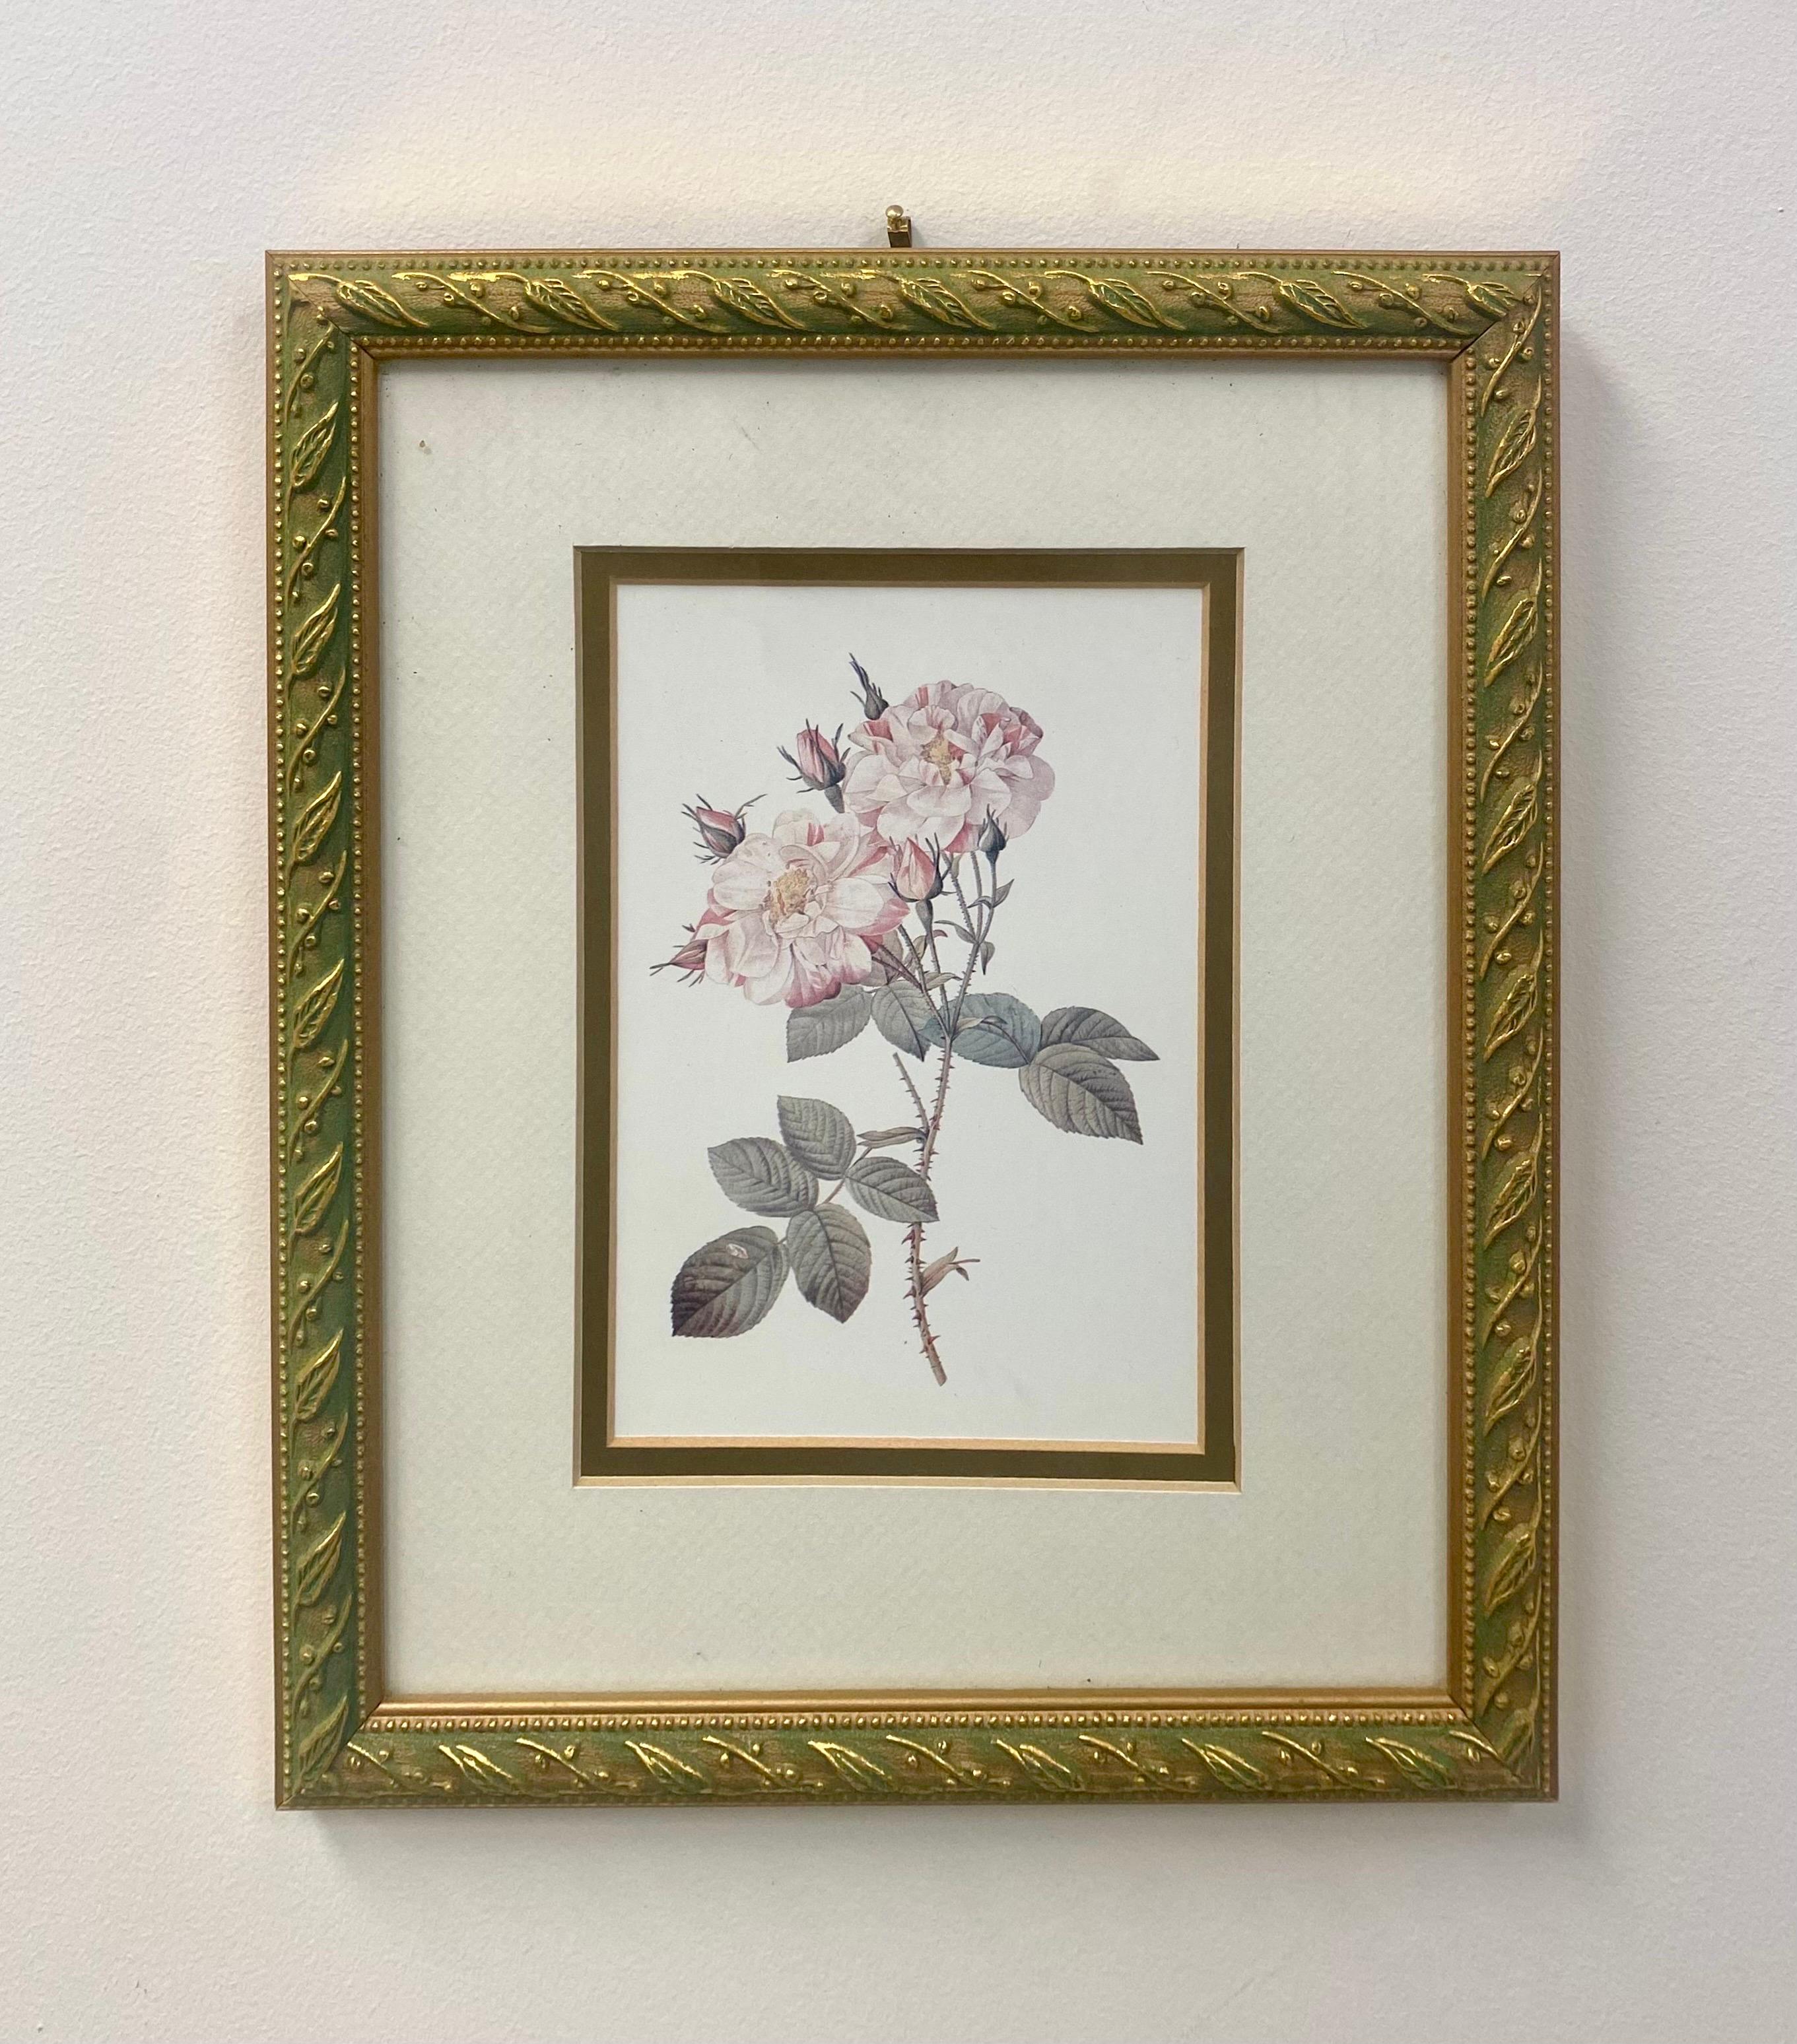 Vintage Flowers Botanicals, Matted and Framed  Set of 4 - Impressionist Print by Unknown